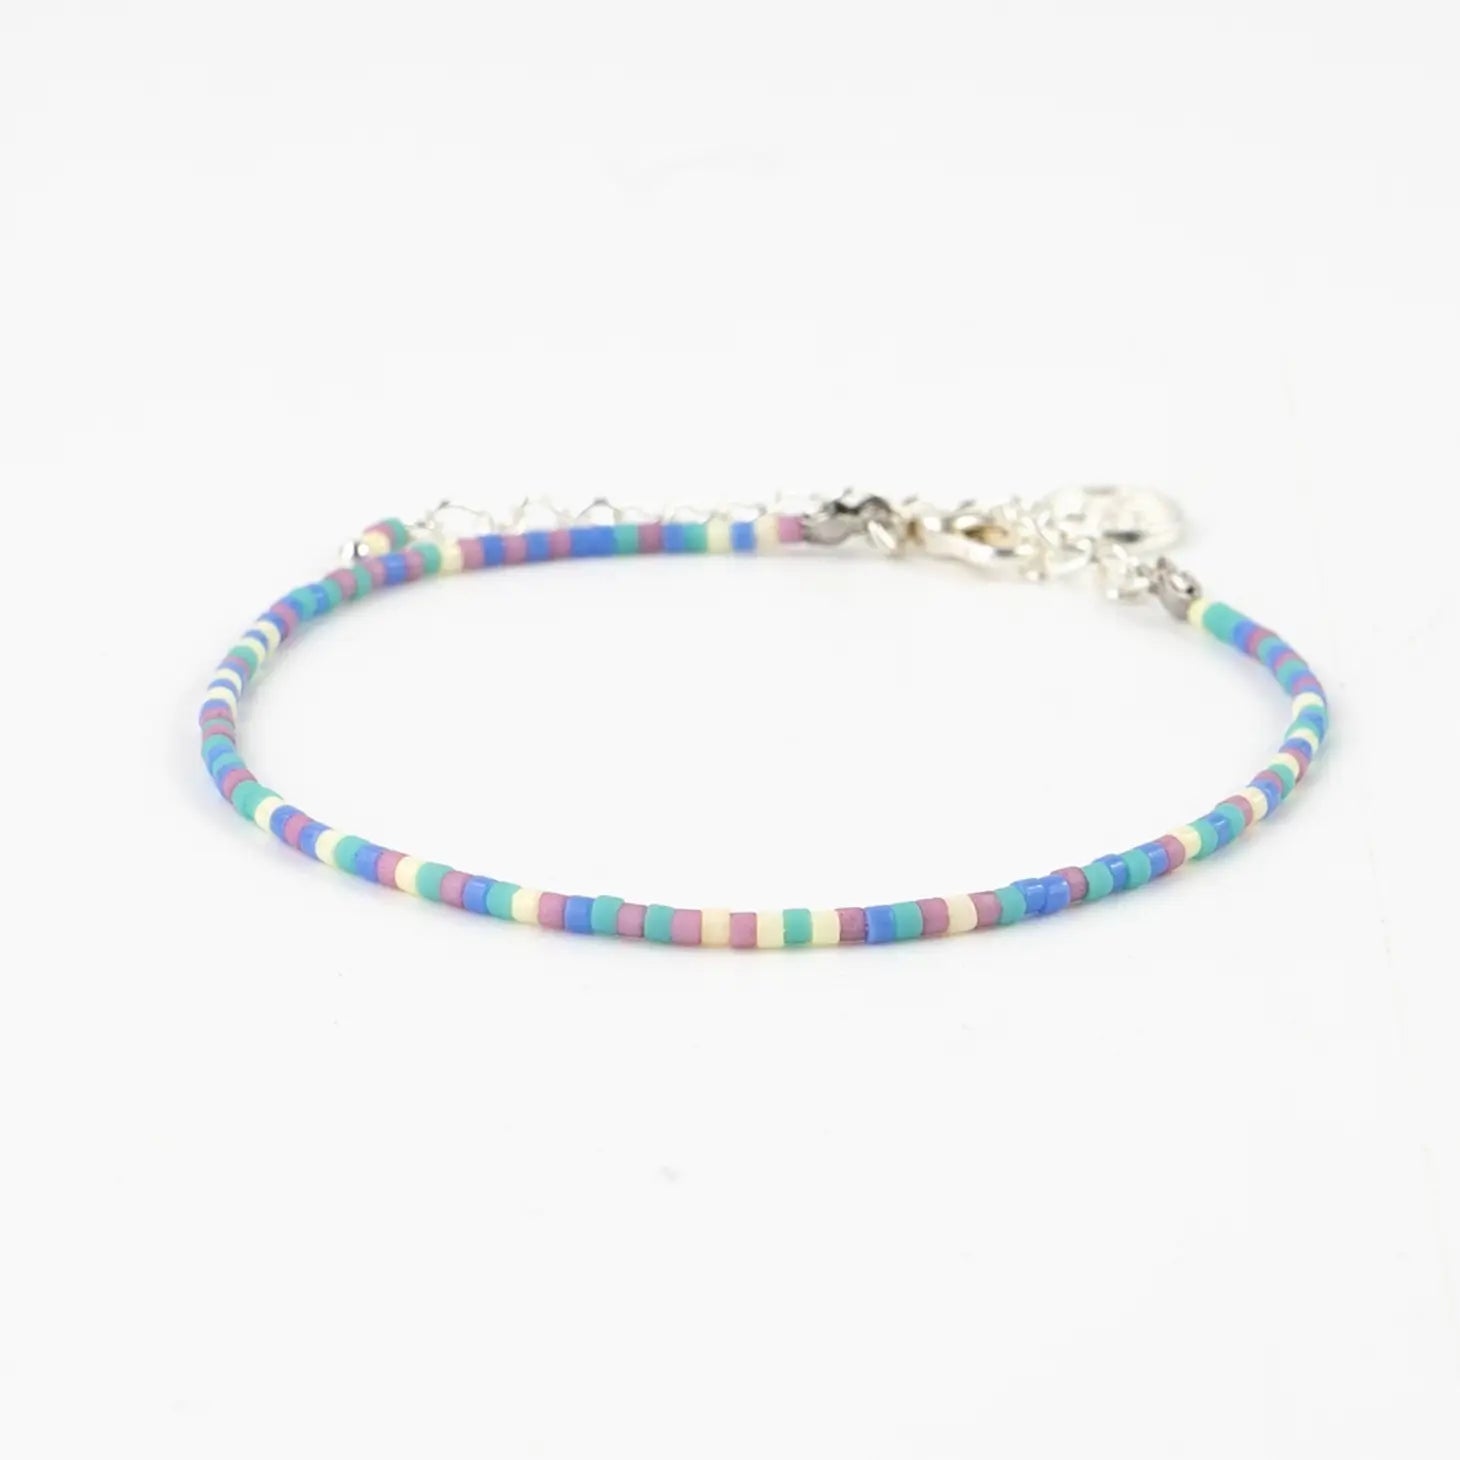 Lilac Reef Beach Beaded Bracelet - P78 - The Hare and the Moon